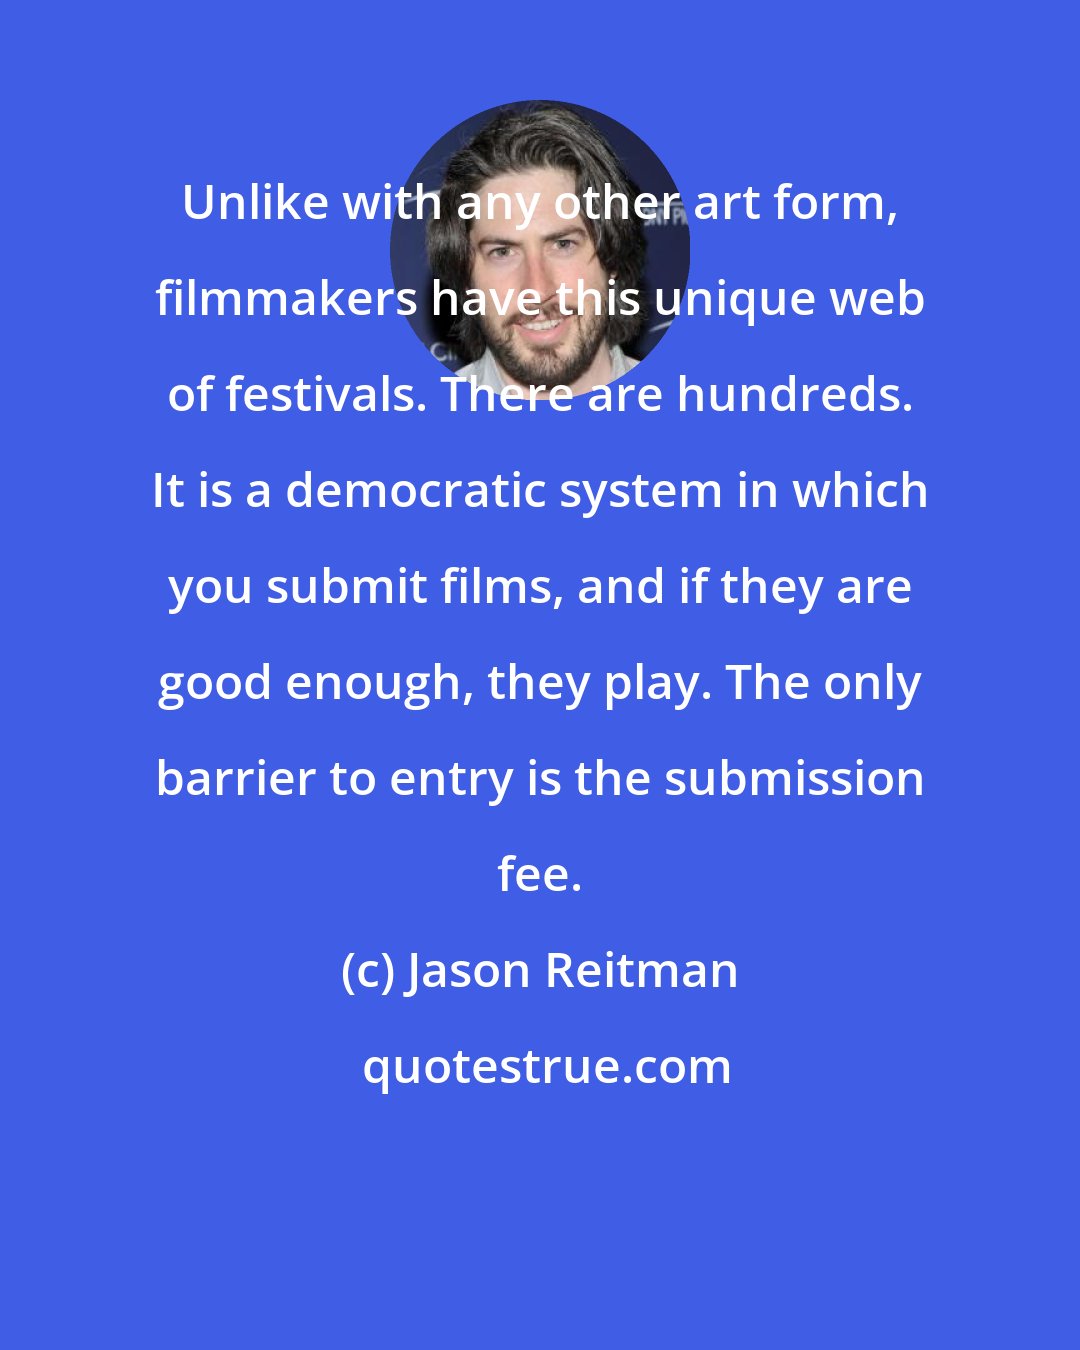 Jason Reitman: Unlike with any other art form, filmmakers have this unique web of festivals. There are hundreds. It is a democratic system in which you submit films, and if they are good enough, they play. The only barrier to entry is the submission fee.